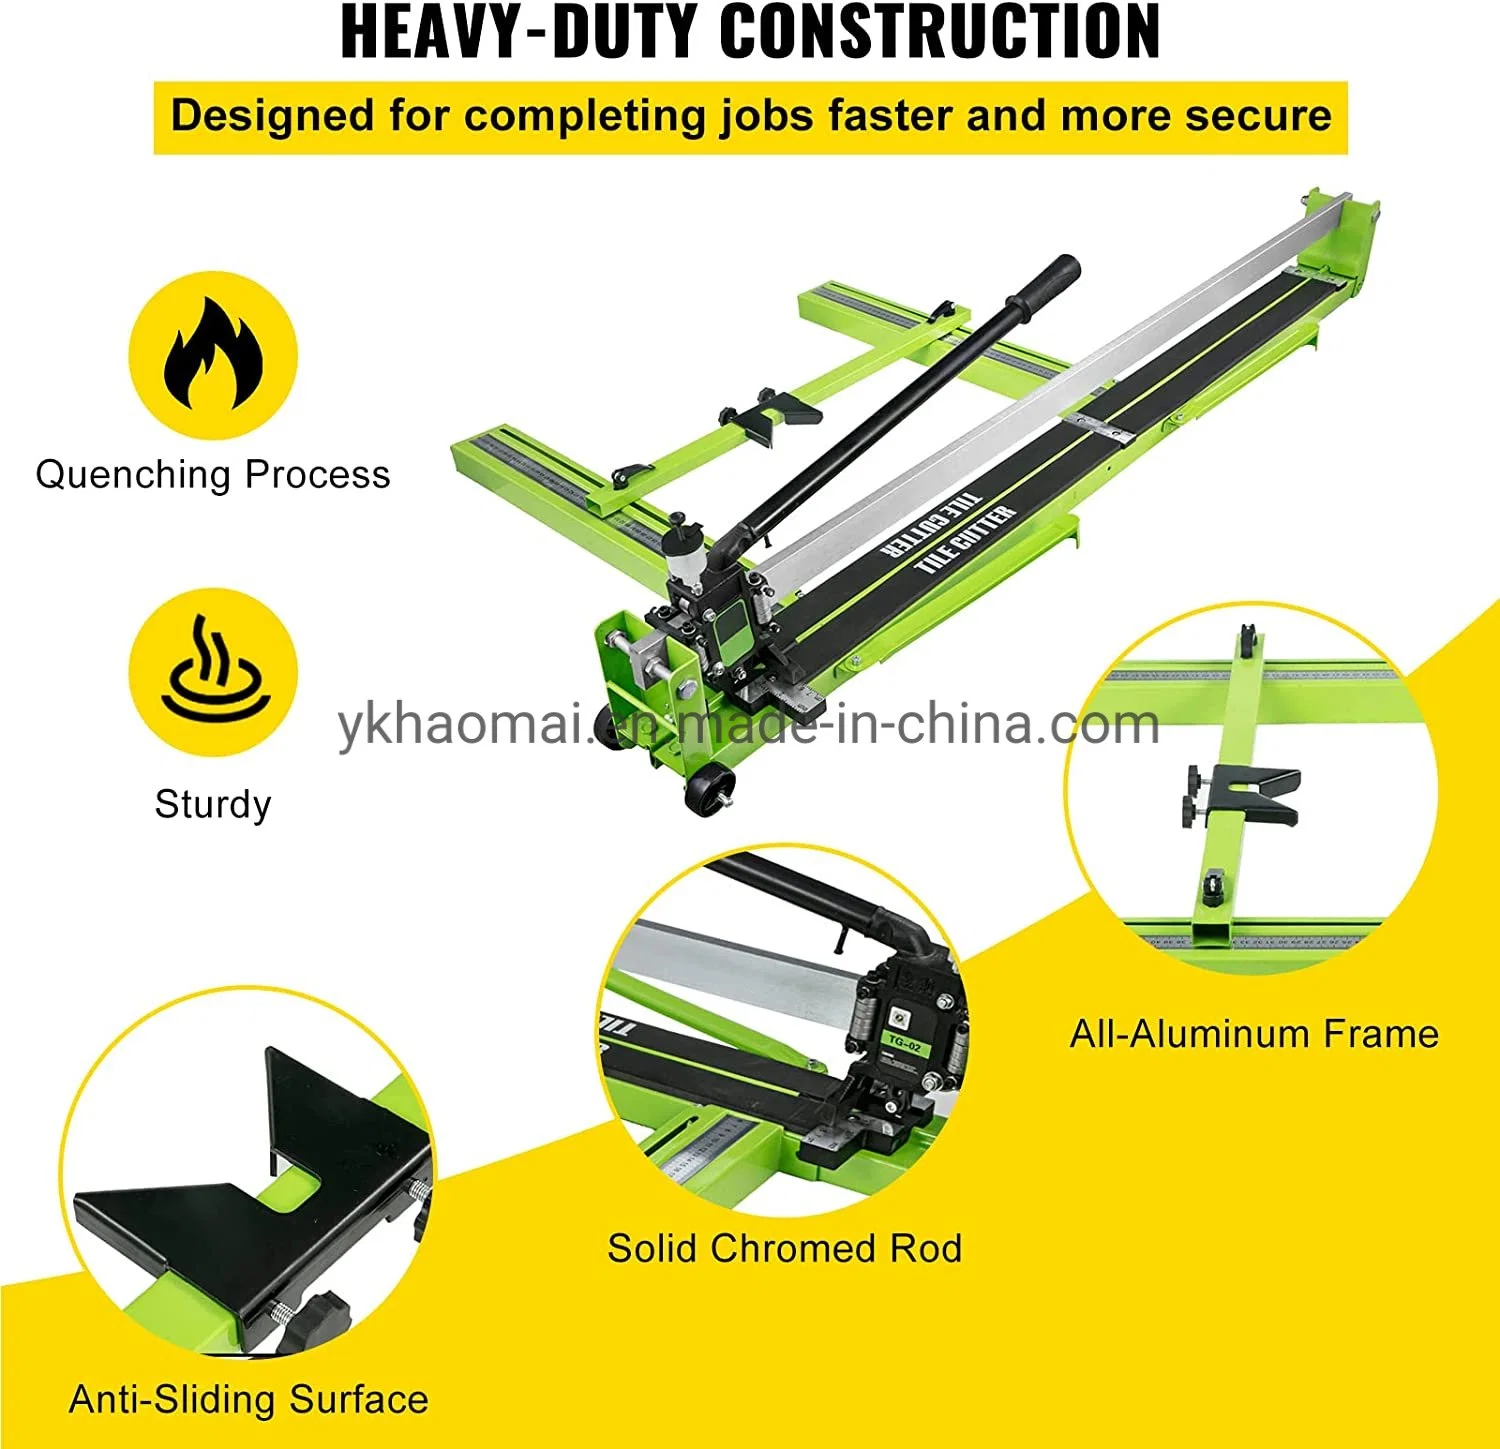 39 Inch 1000mm Manual Tile Cutter All-Steel Frame, Tile Cutting Machine W/Laser Guide and Bonus Spare Tile Cutter Hand Tool for Precision Cutting Porcelain Cera